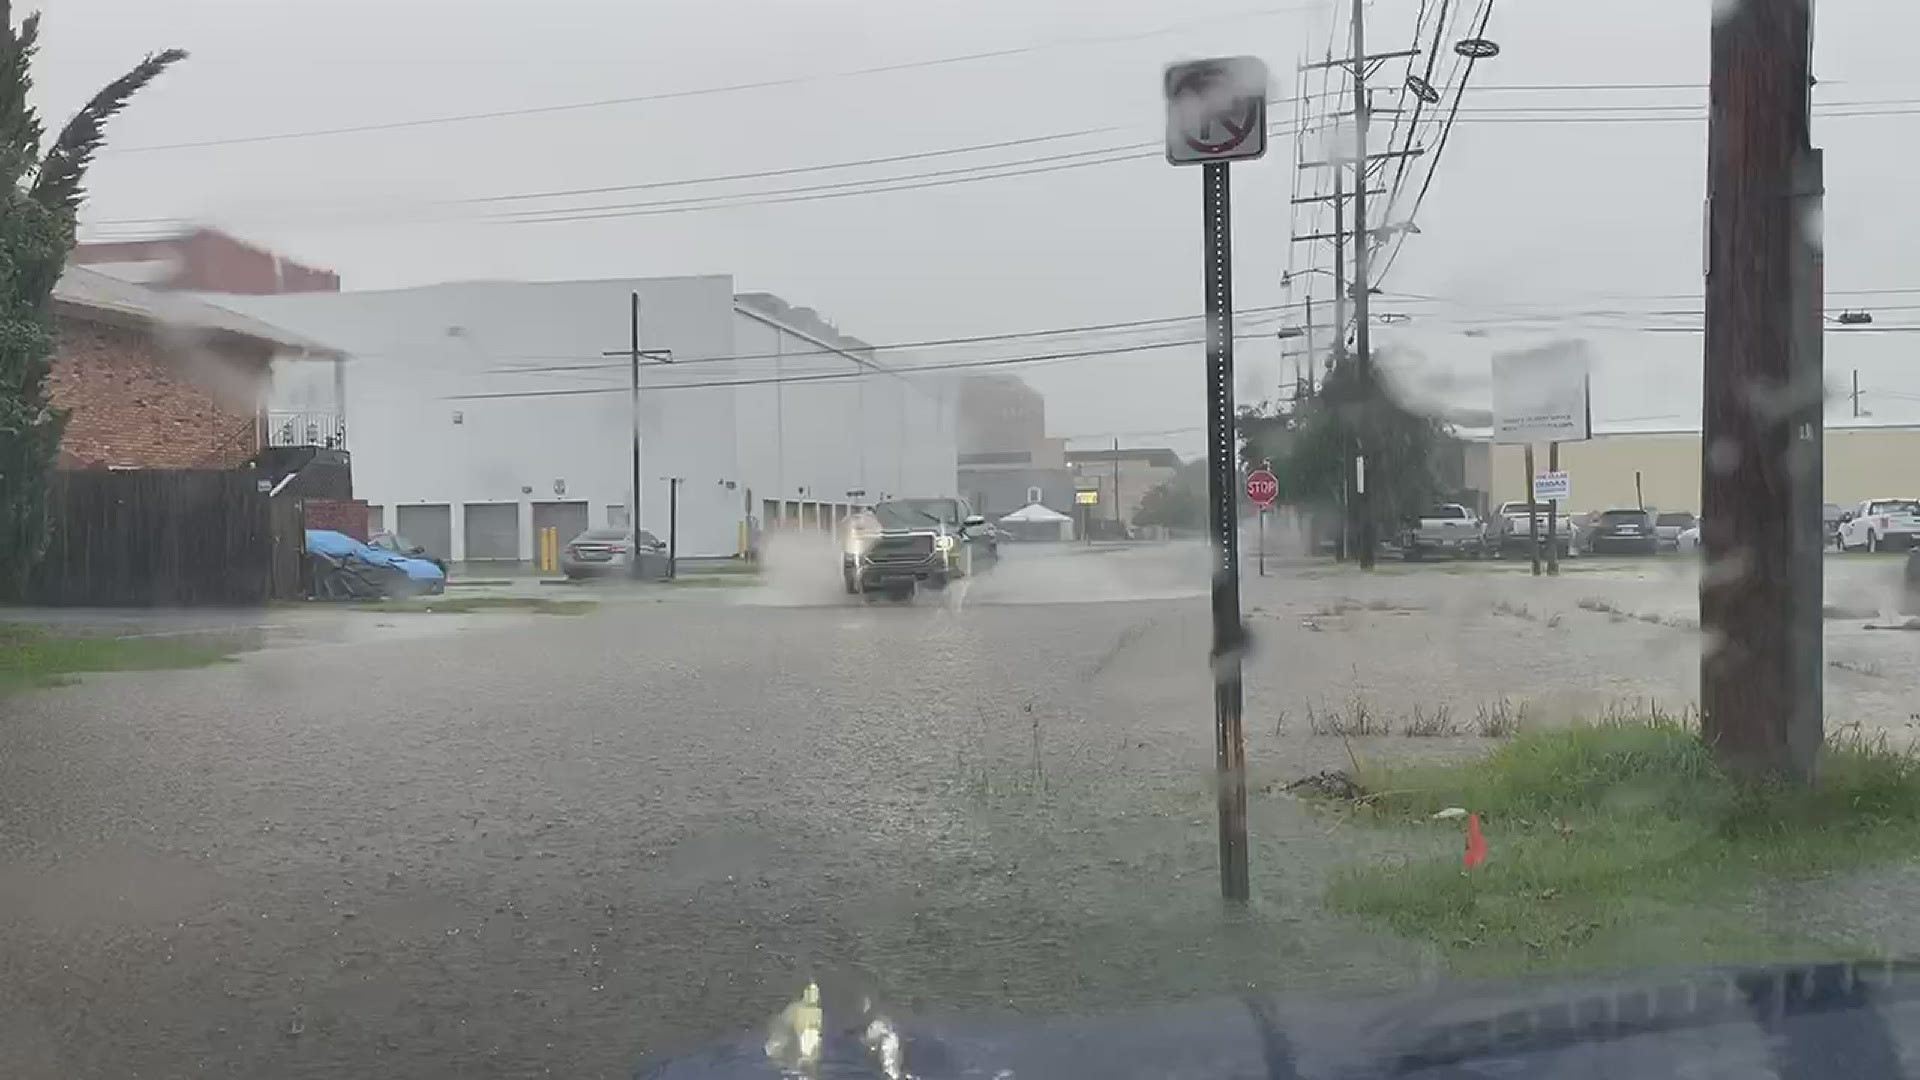 Sustained downpours during the Wednesday morning commute have caused multiple streets to flood around the city and prompted a flash flood warning.